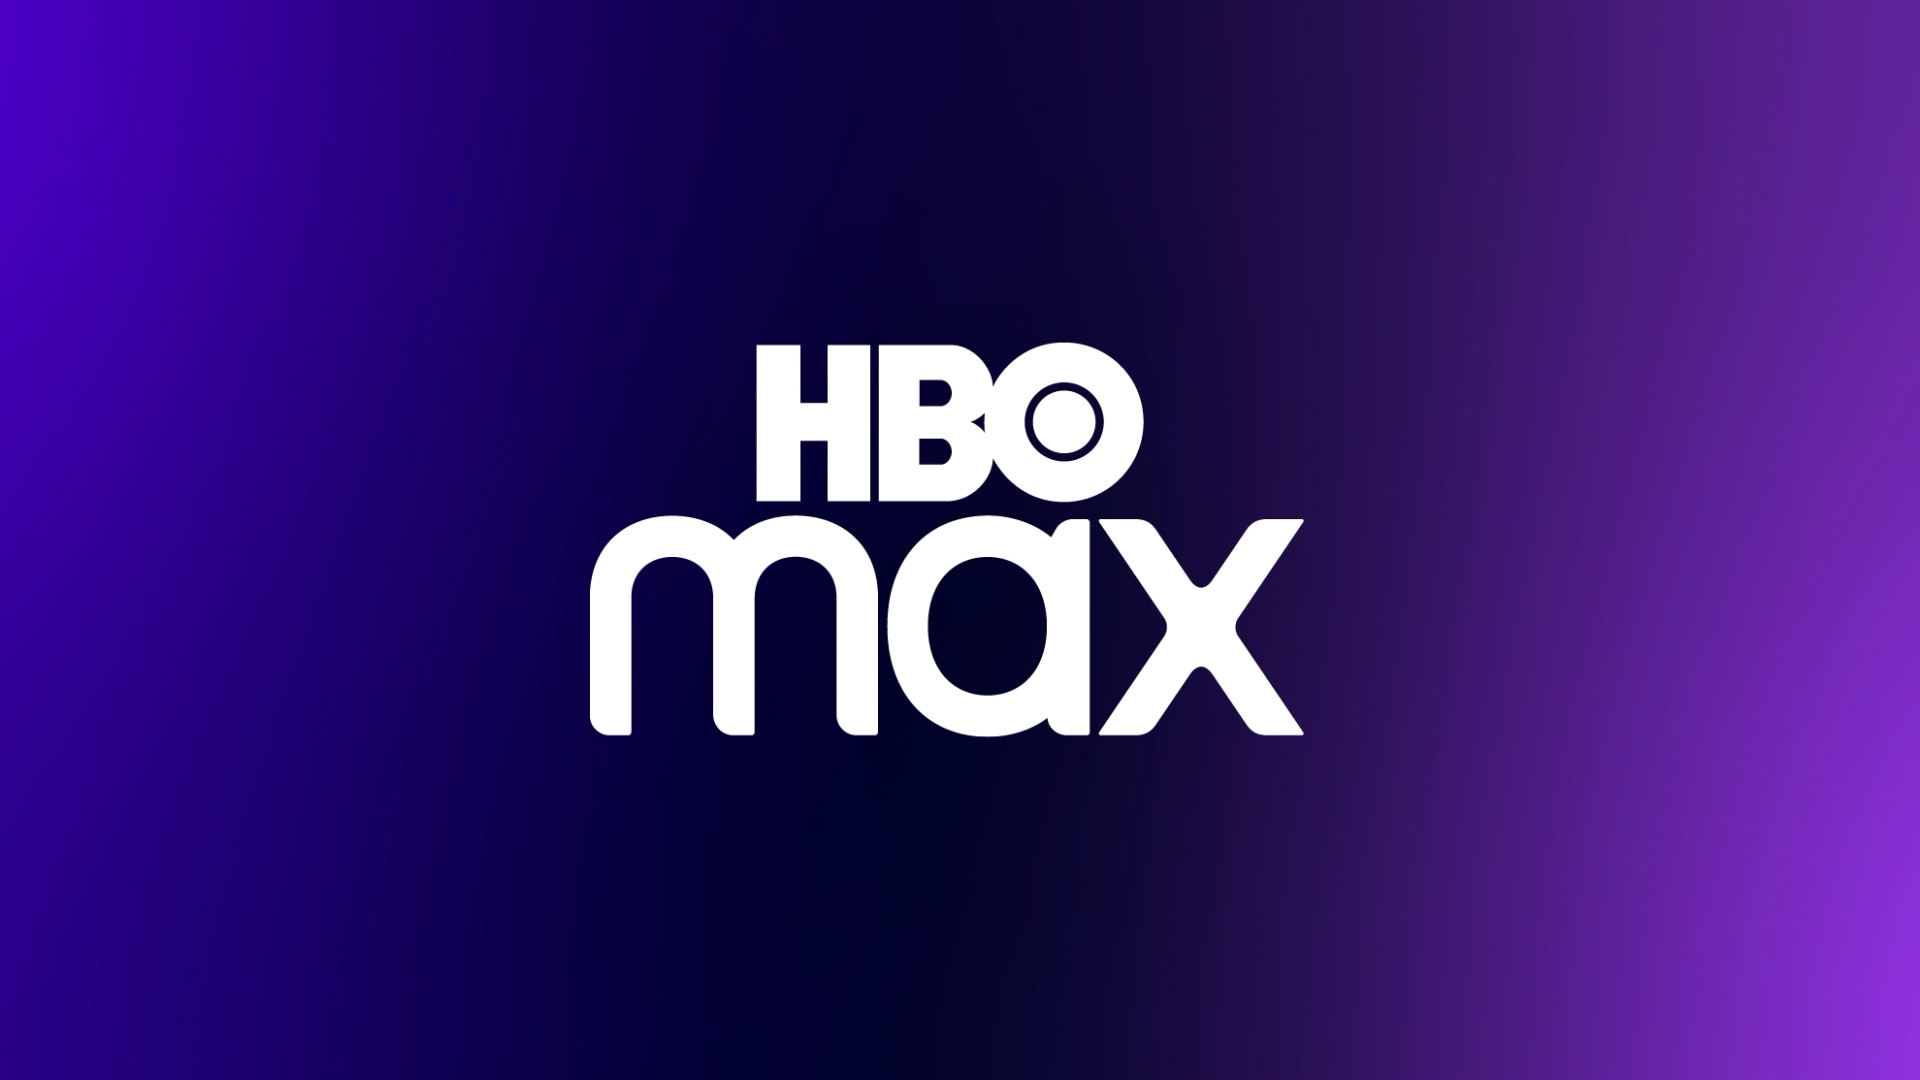 HBO: Streaming platform, Brings all of HBO's content together under one roof. 1920x1080 Full HD Wallpaper.